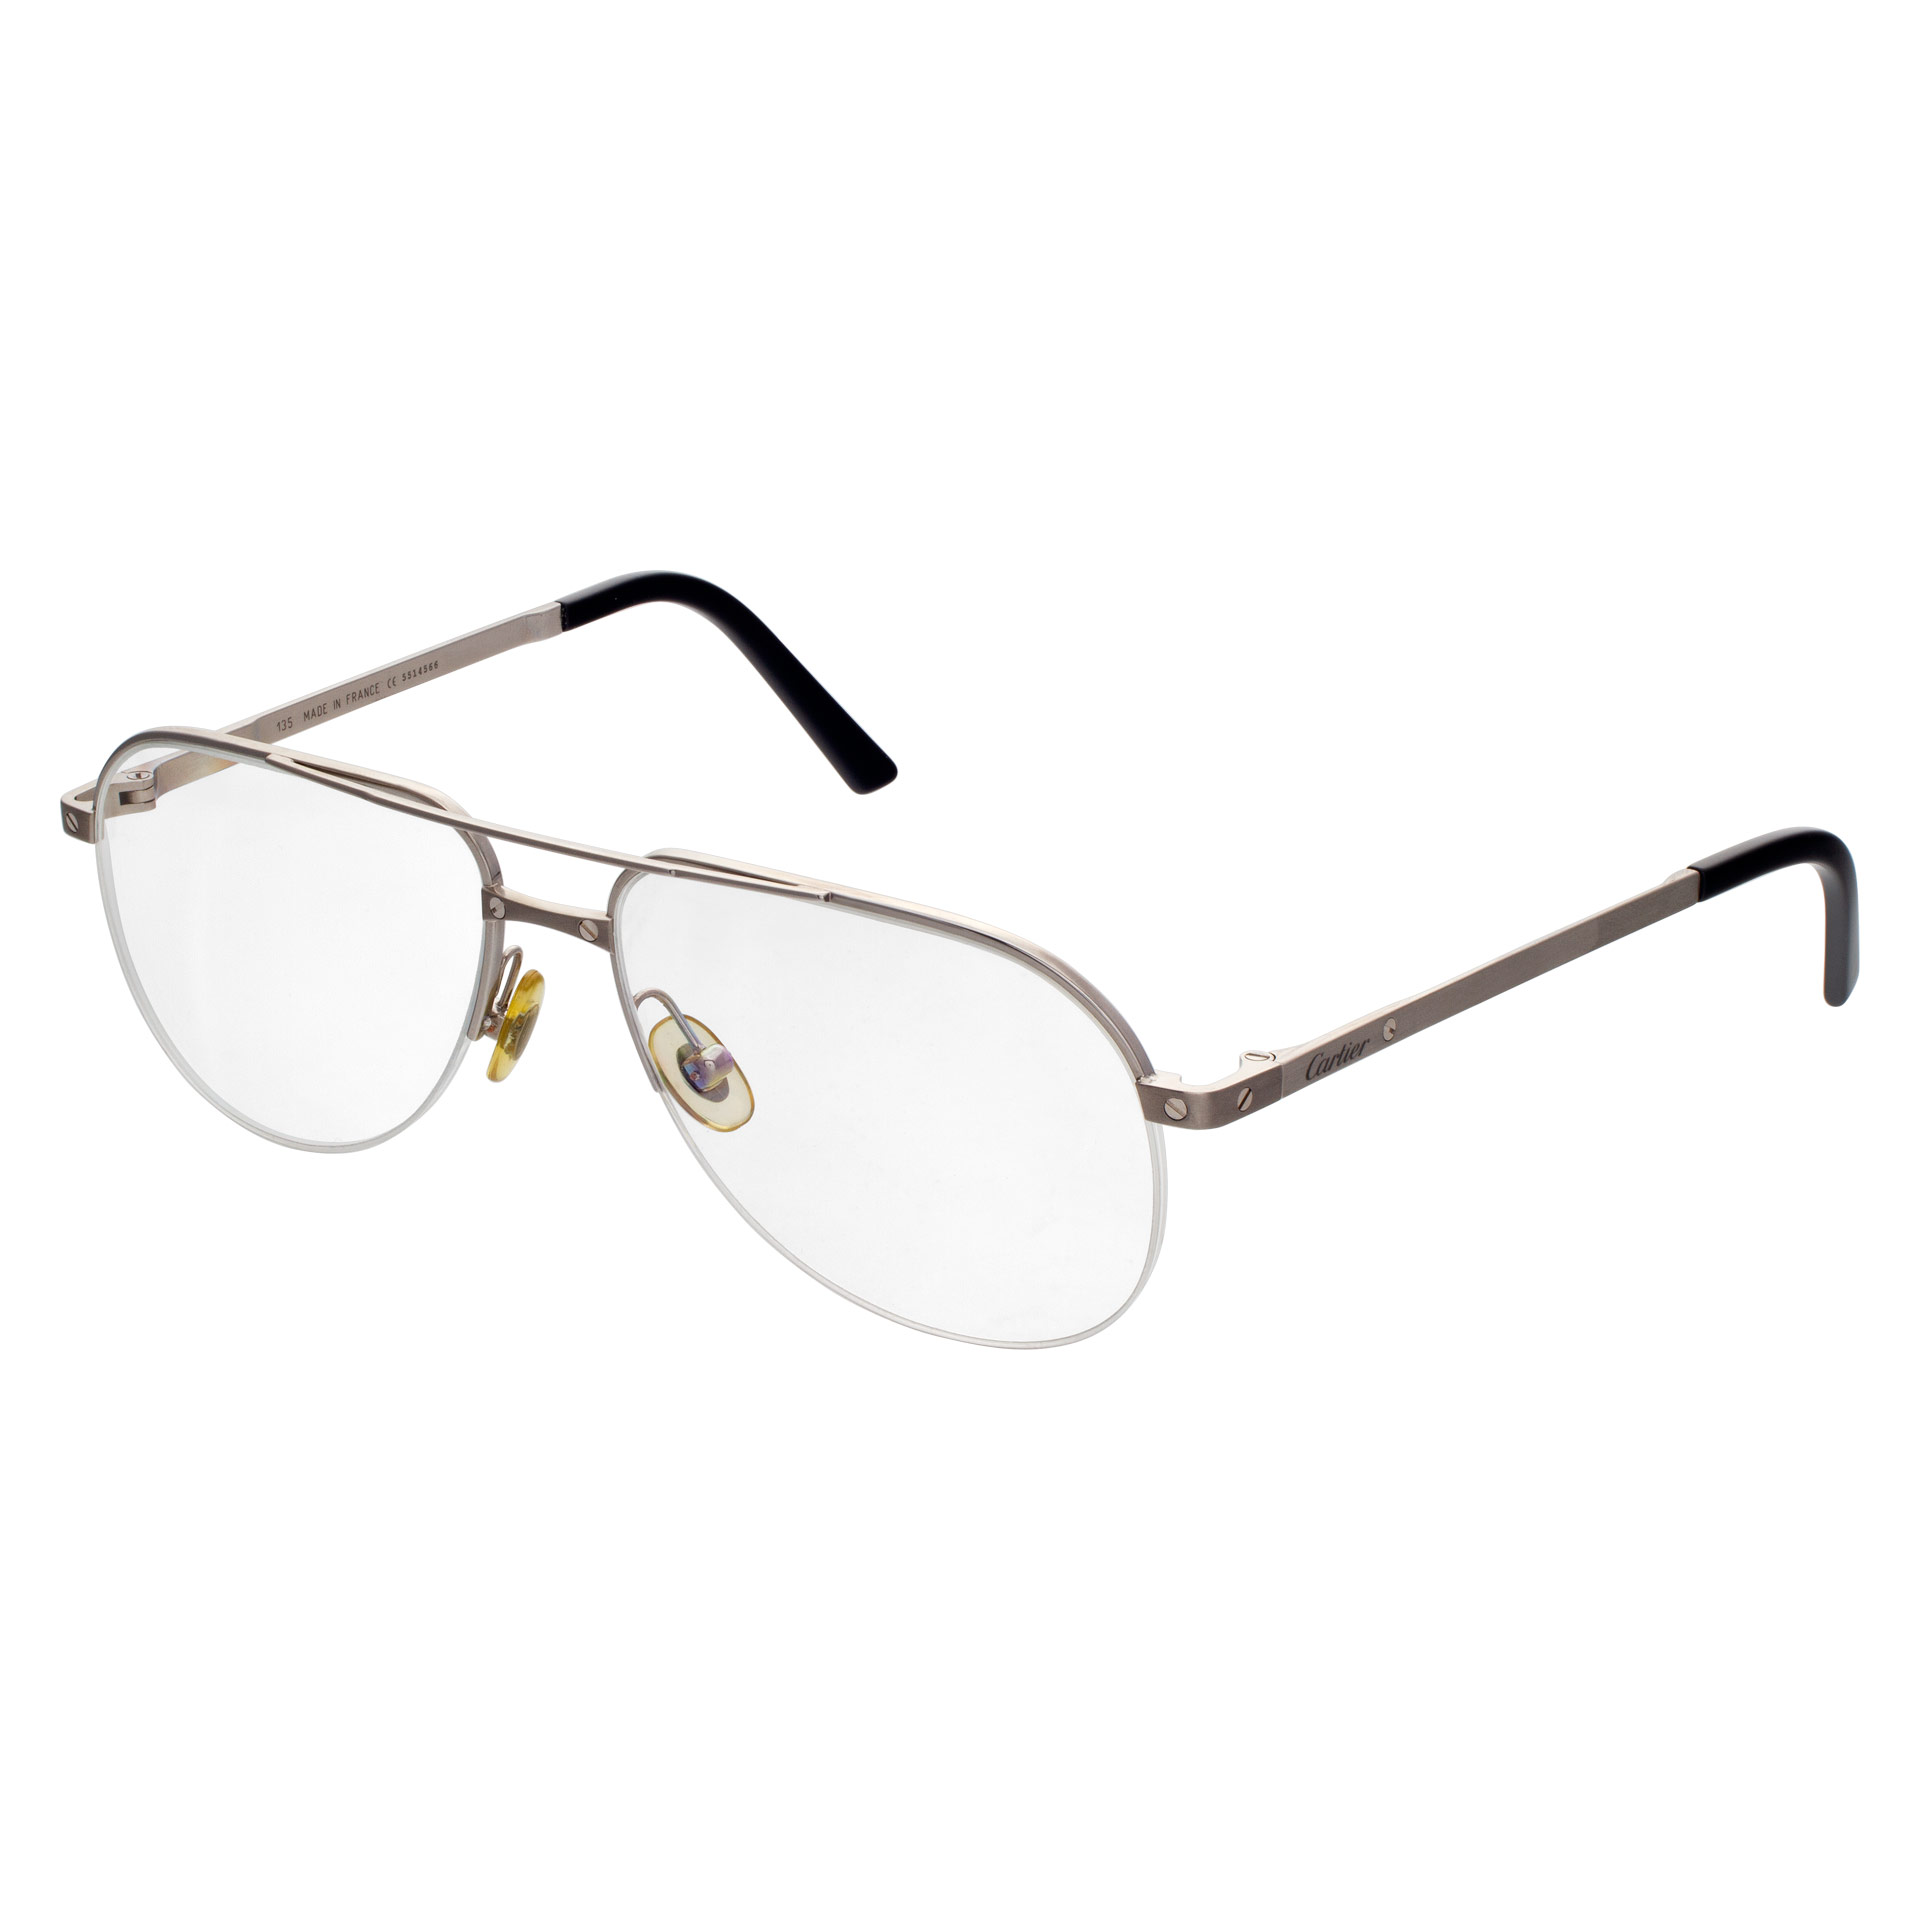 Cartier glasses stainless steel frame image 5